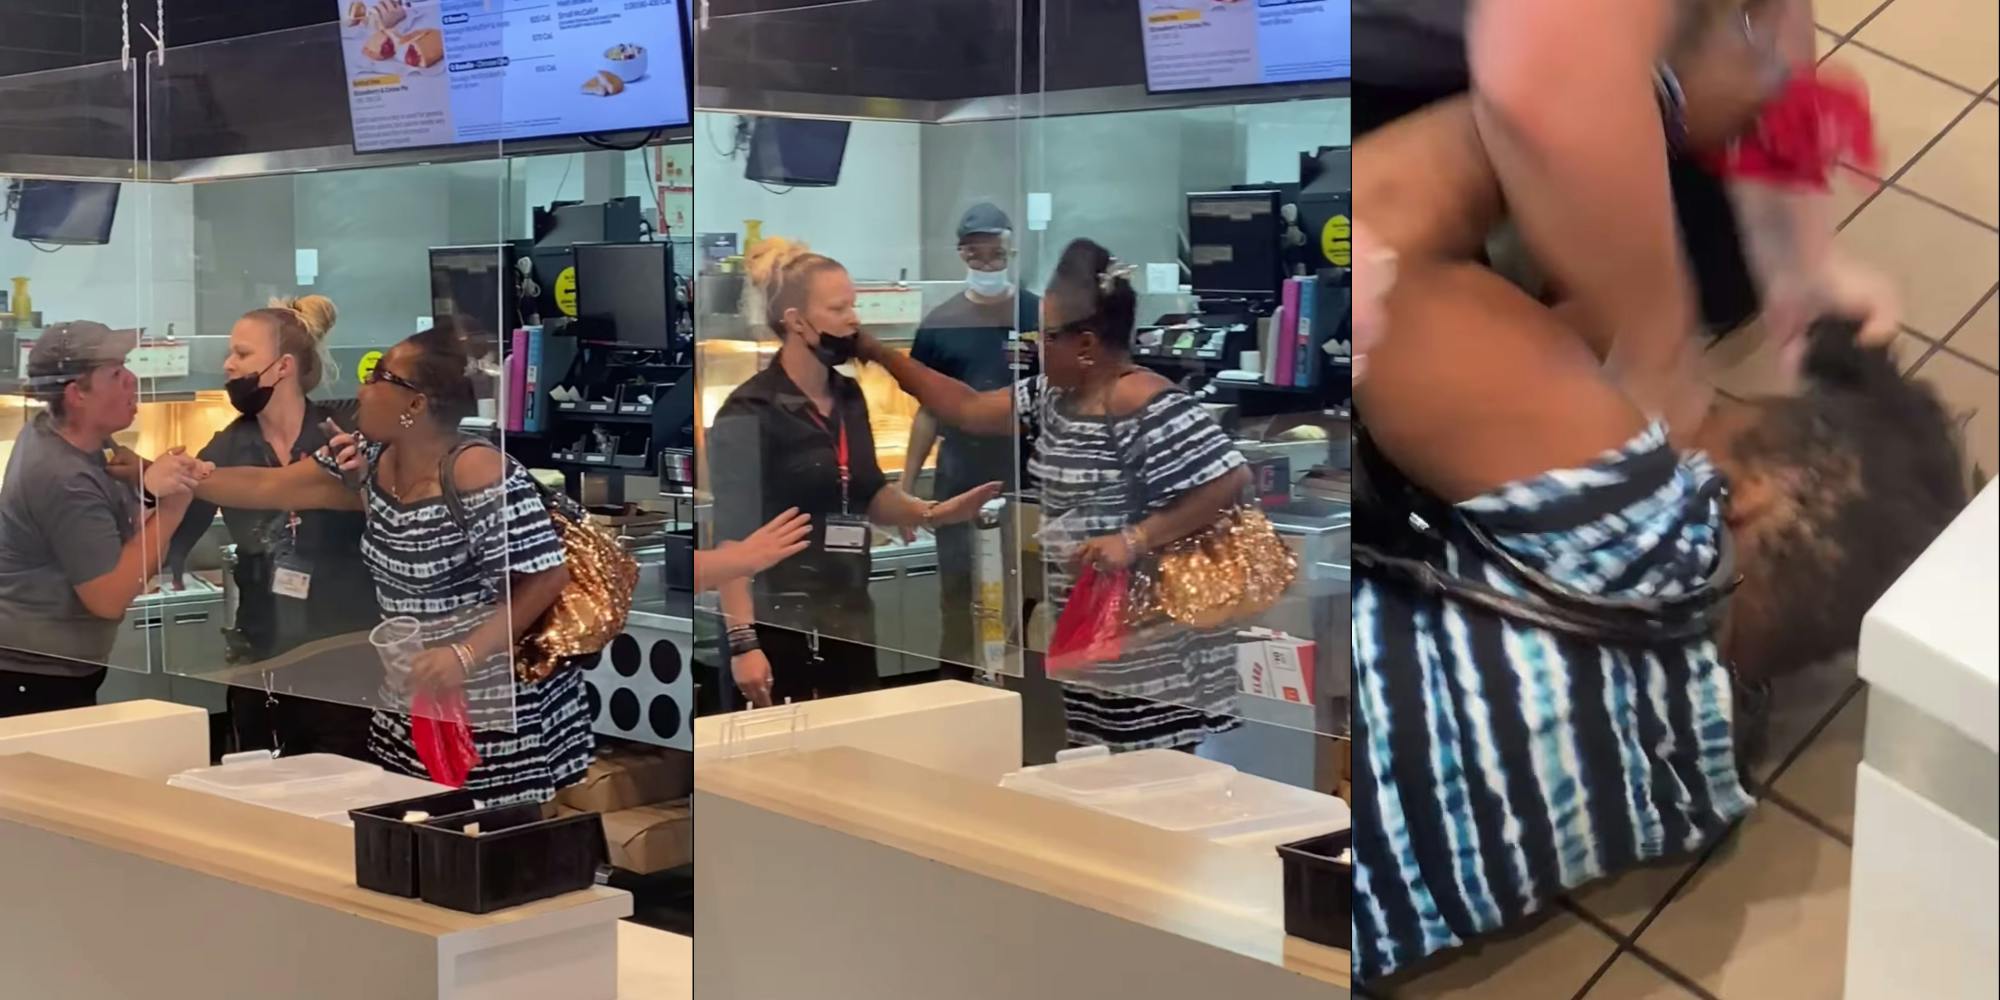 Woman attacks McDonald's employees over a slushie